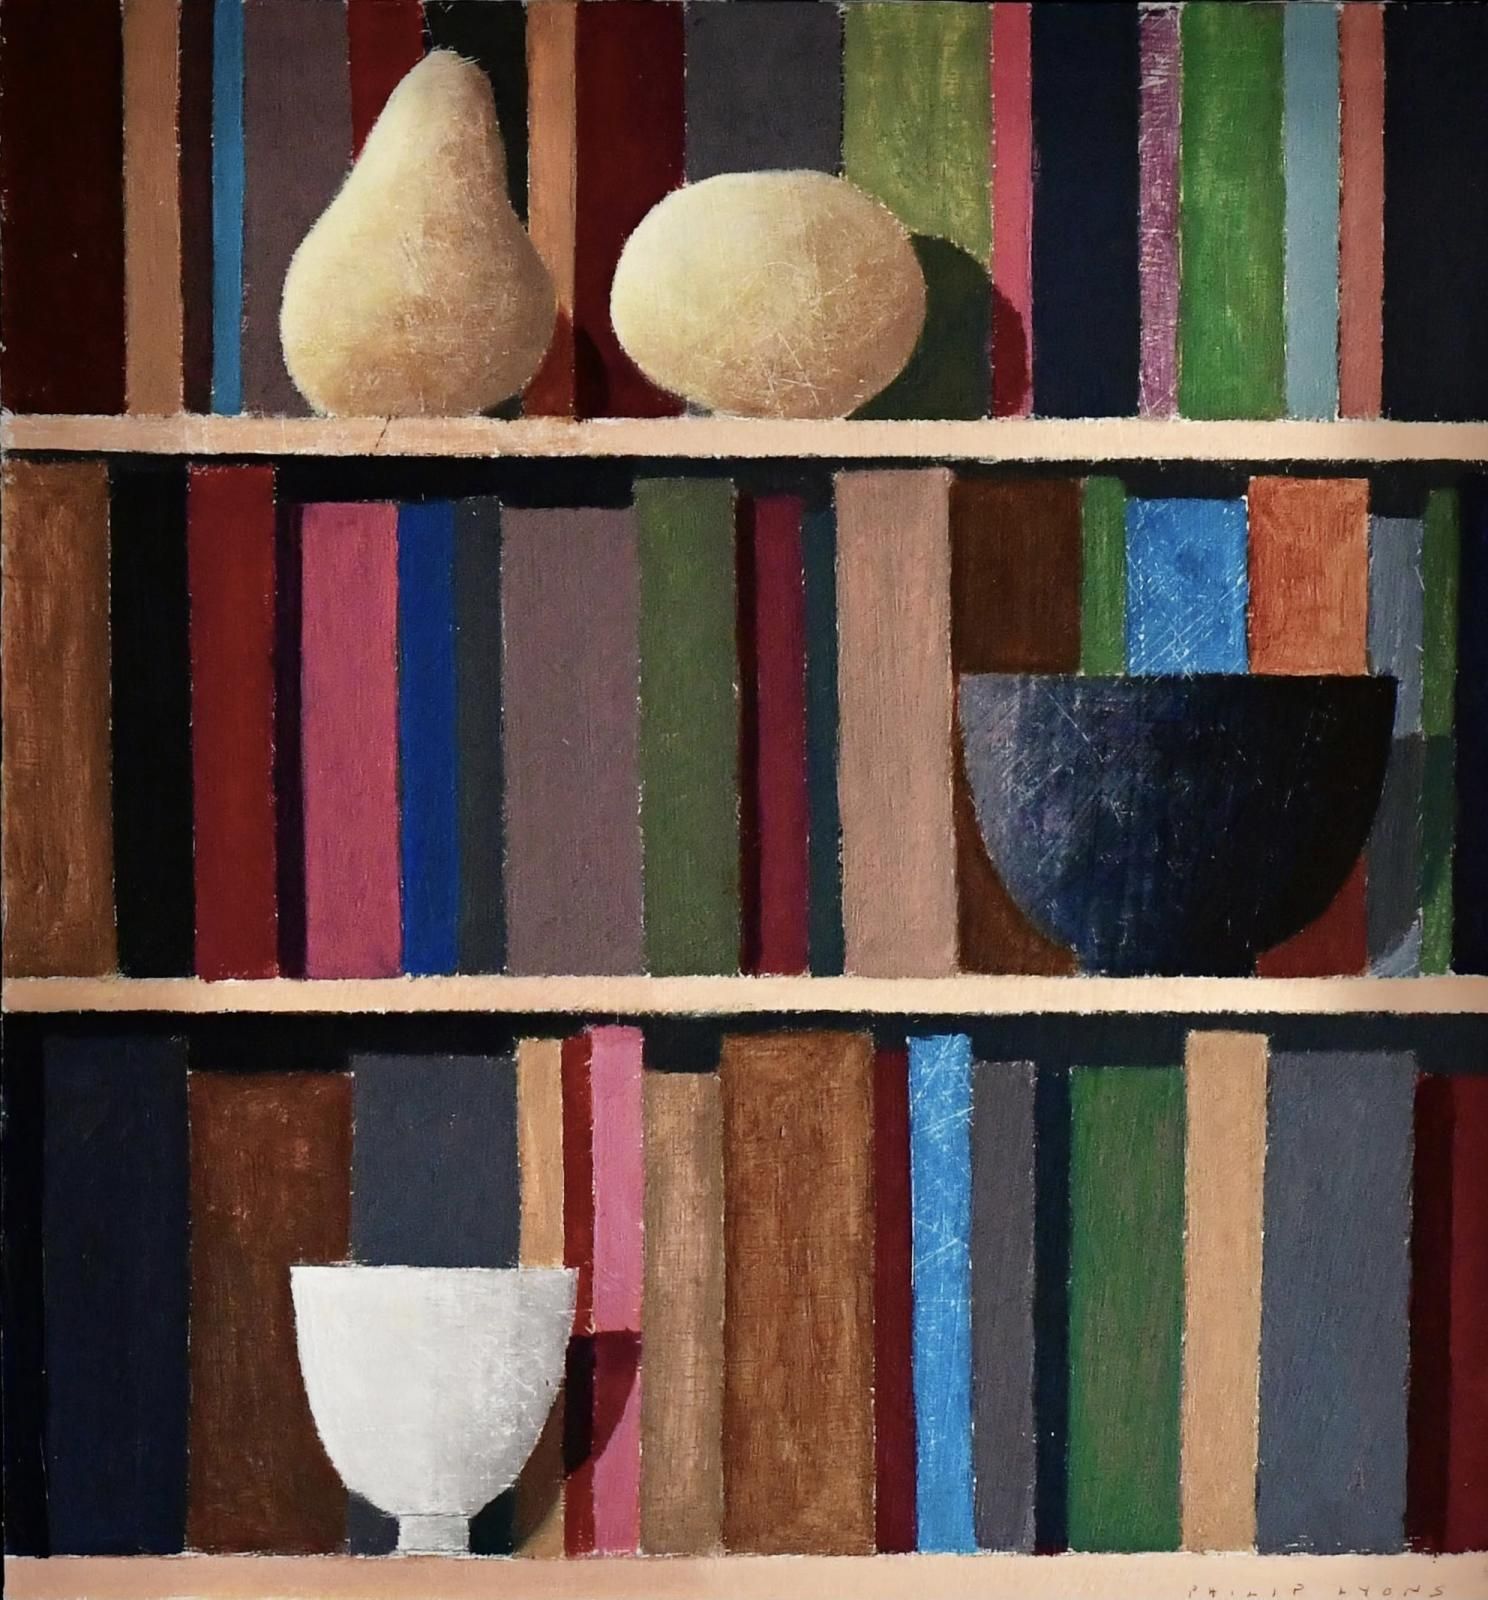 Philip Lyons - Two Gourds - Two Bowls - Three Shelves ( many books )